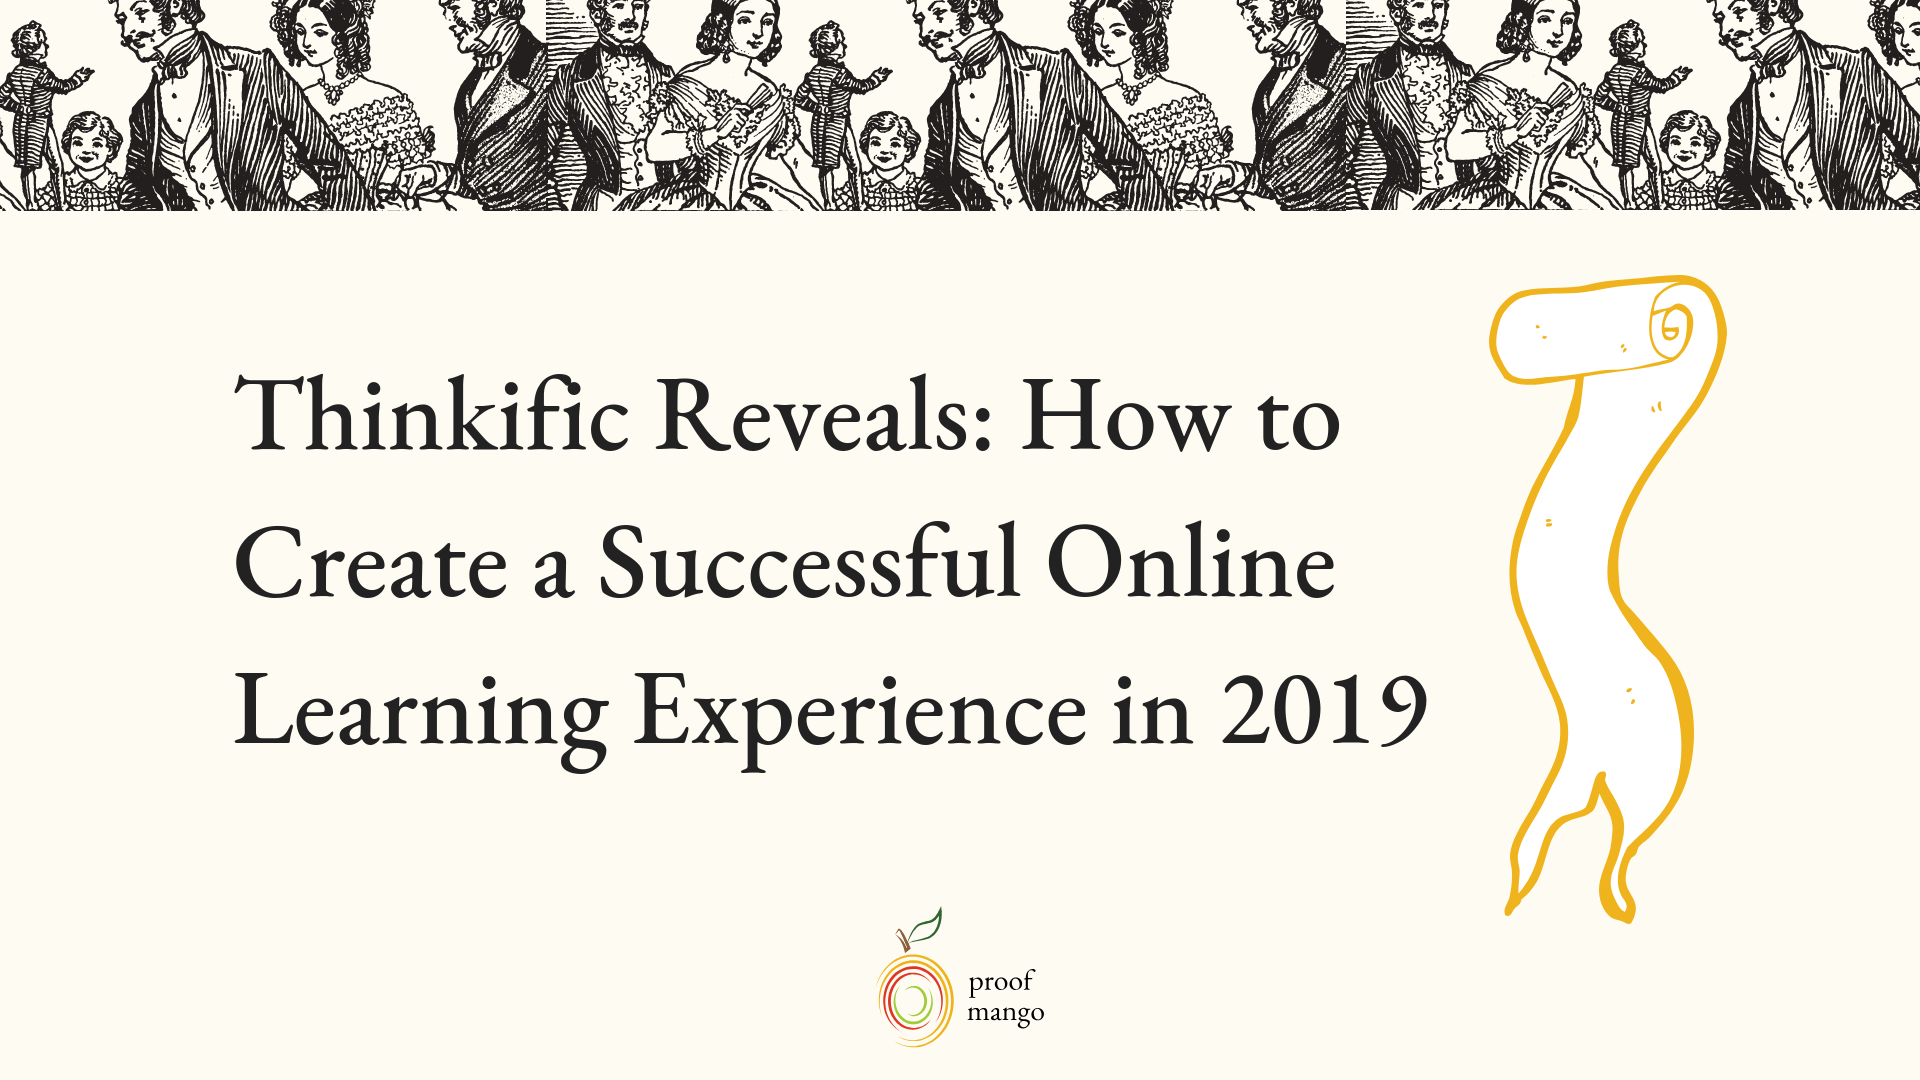 Thinkific-Reveals_-How-to-Create-a-Successful-Online-Learning-Experience-in-2019